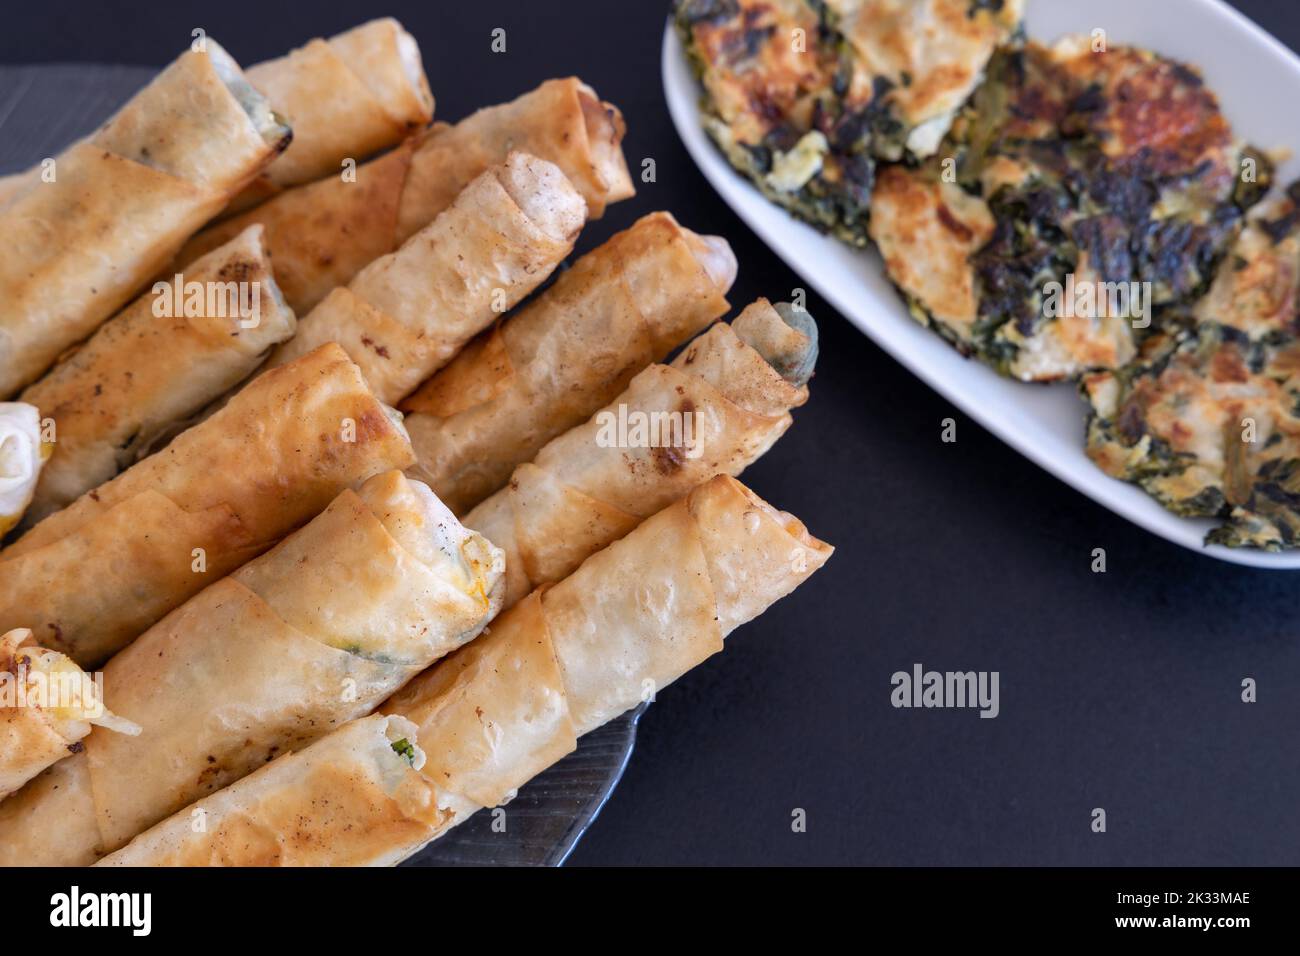 Turkish Cigar Shaped Rolls. Traditional Borek, Burek, cooked, grilled fresh spring rolls food on black background. Copy Space, Top View. Stock Photo